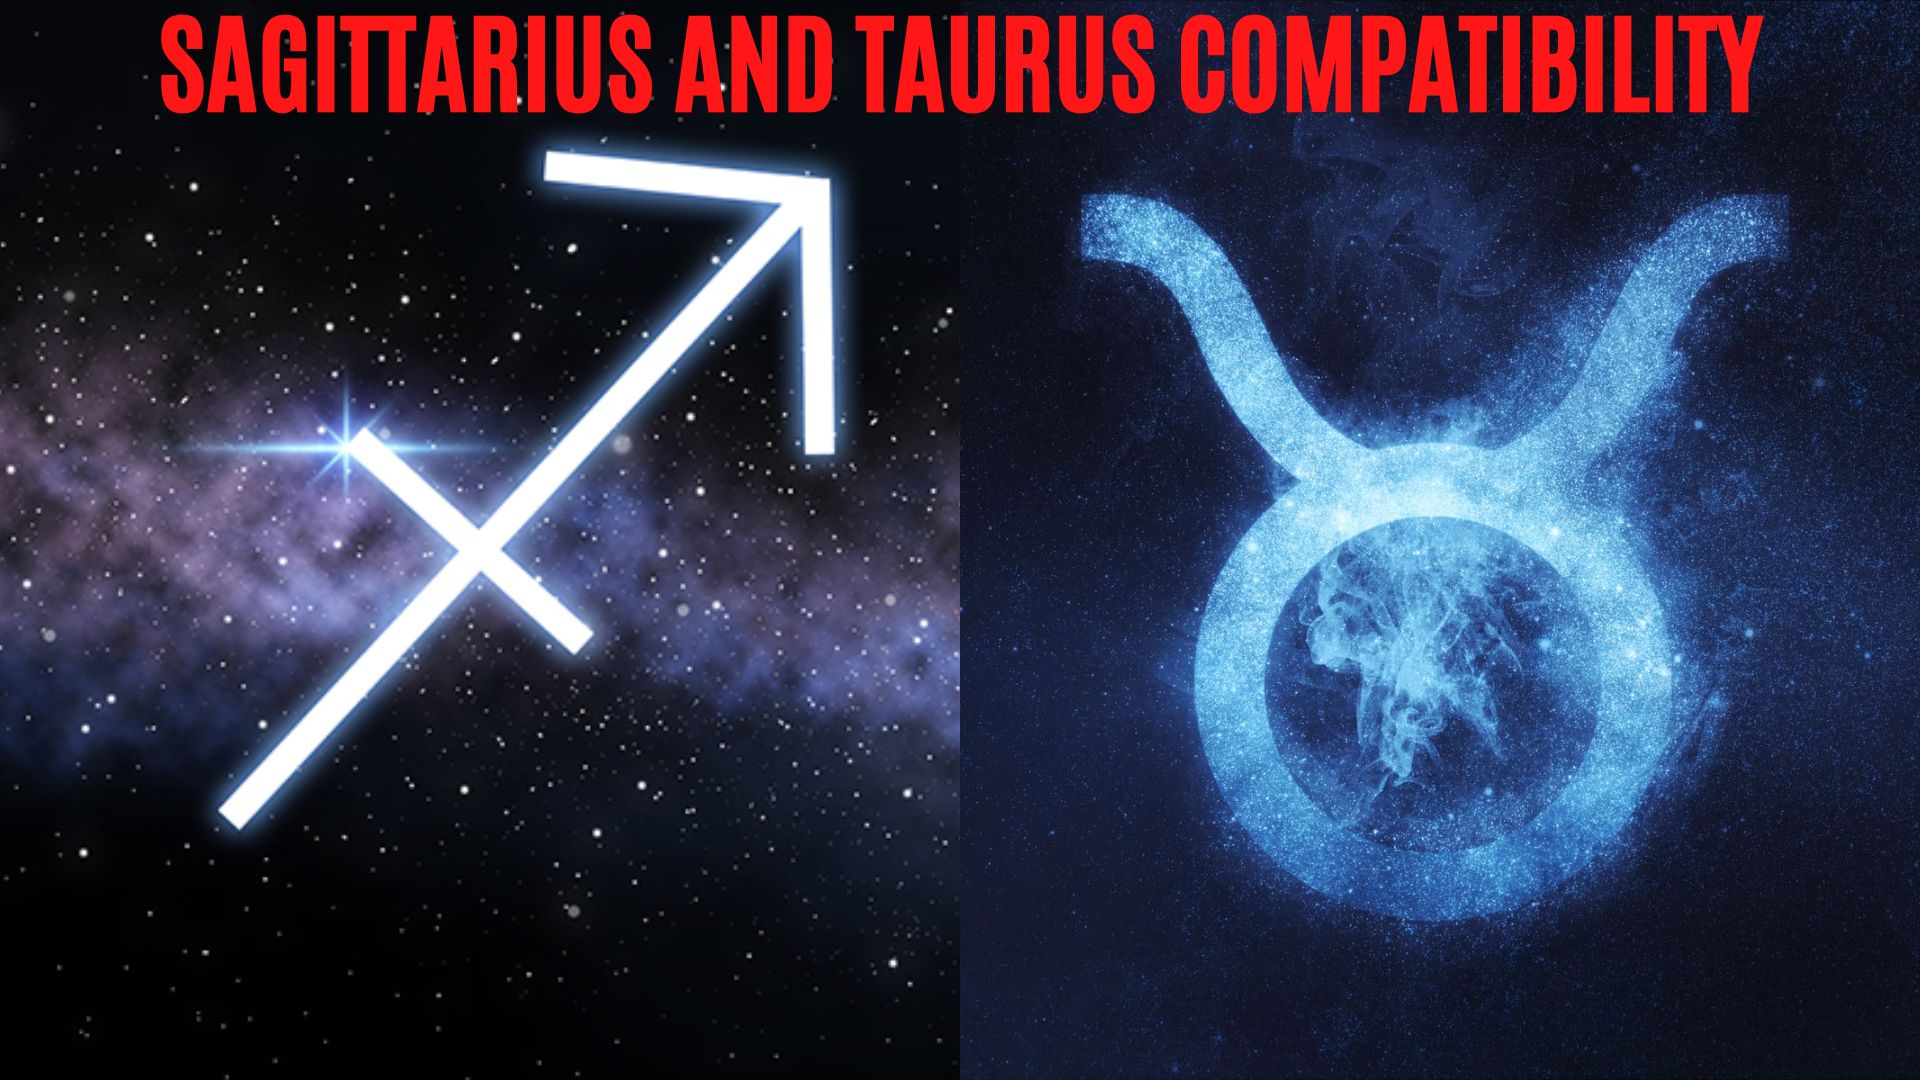 Sagittarius And Taurus Compatibility - Will Be A Fruitful One